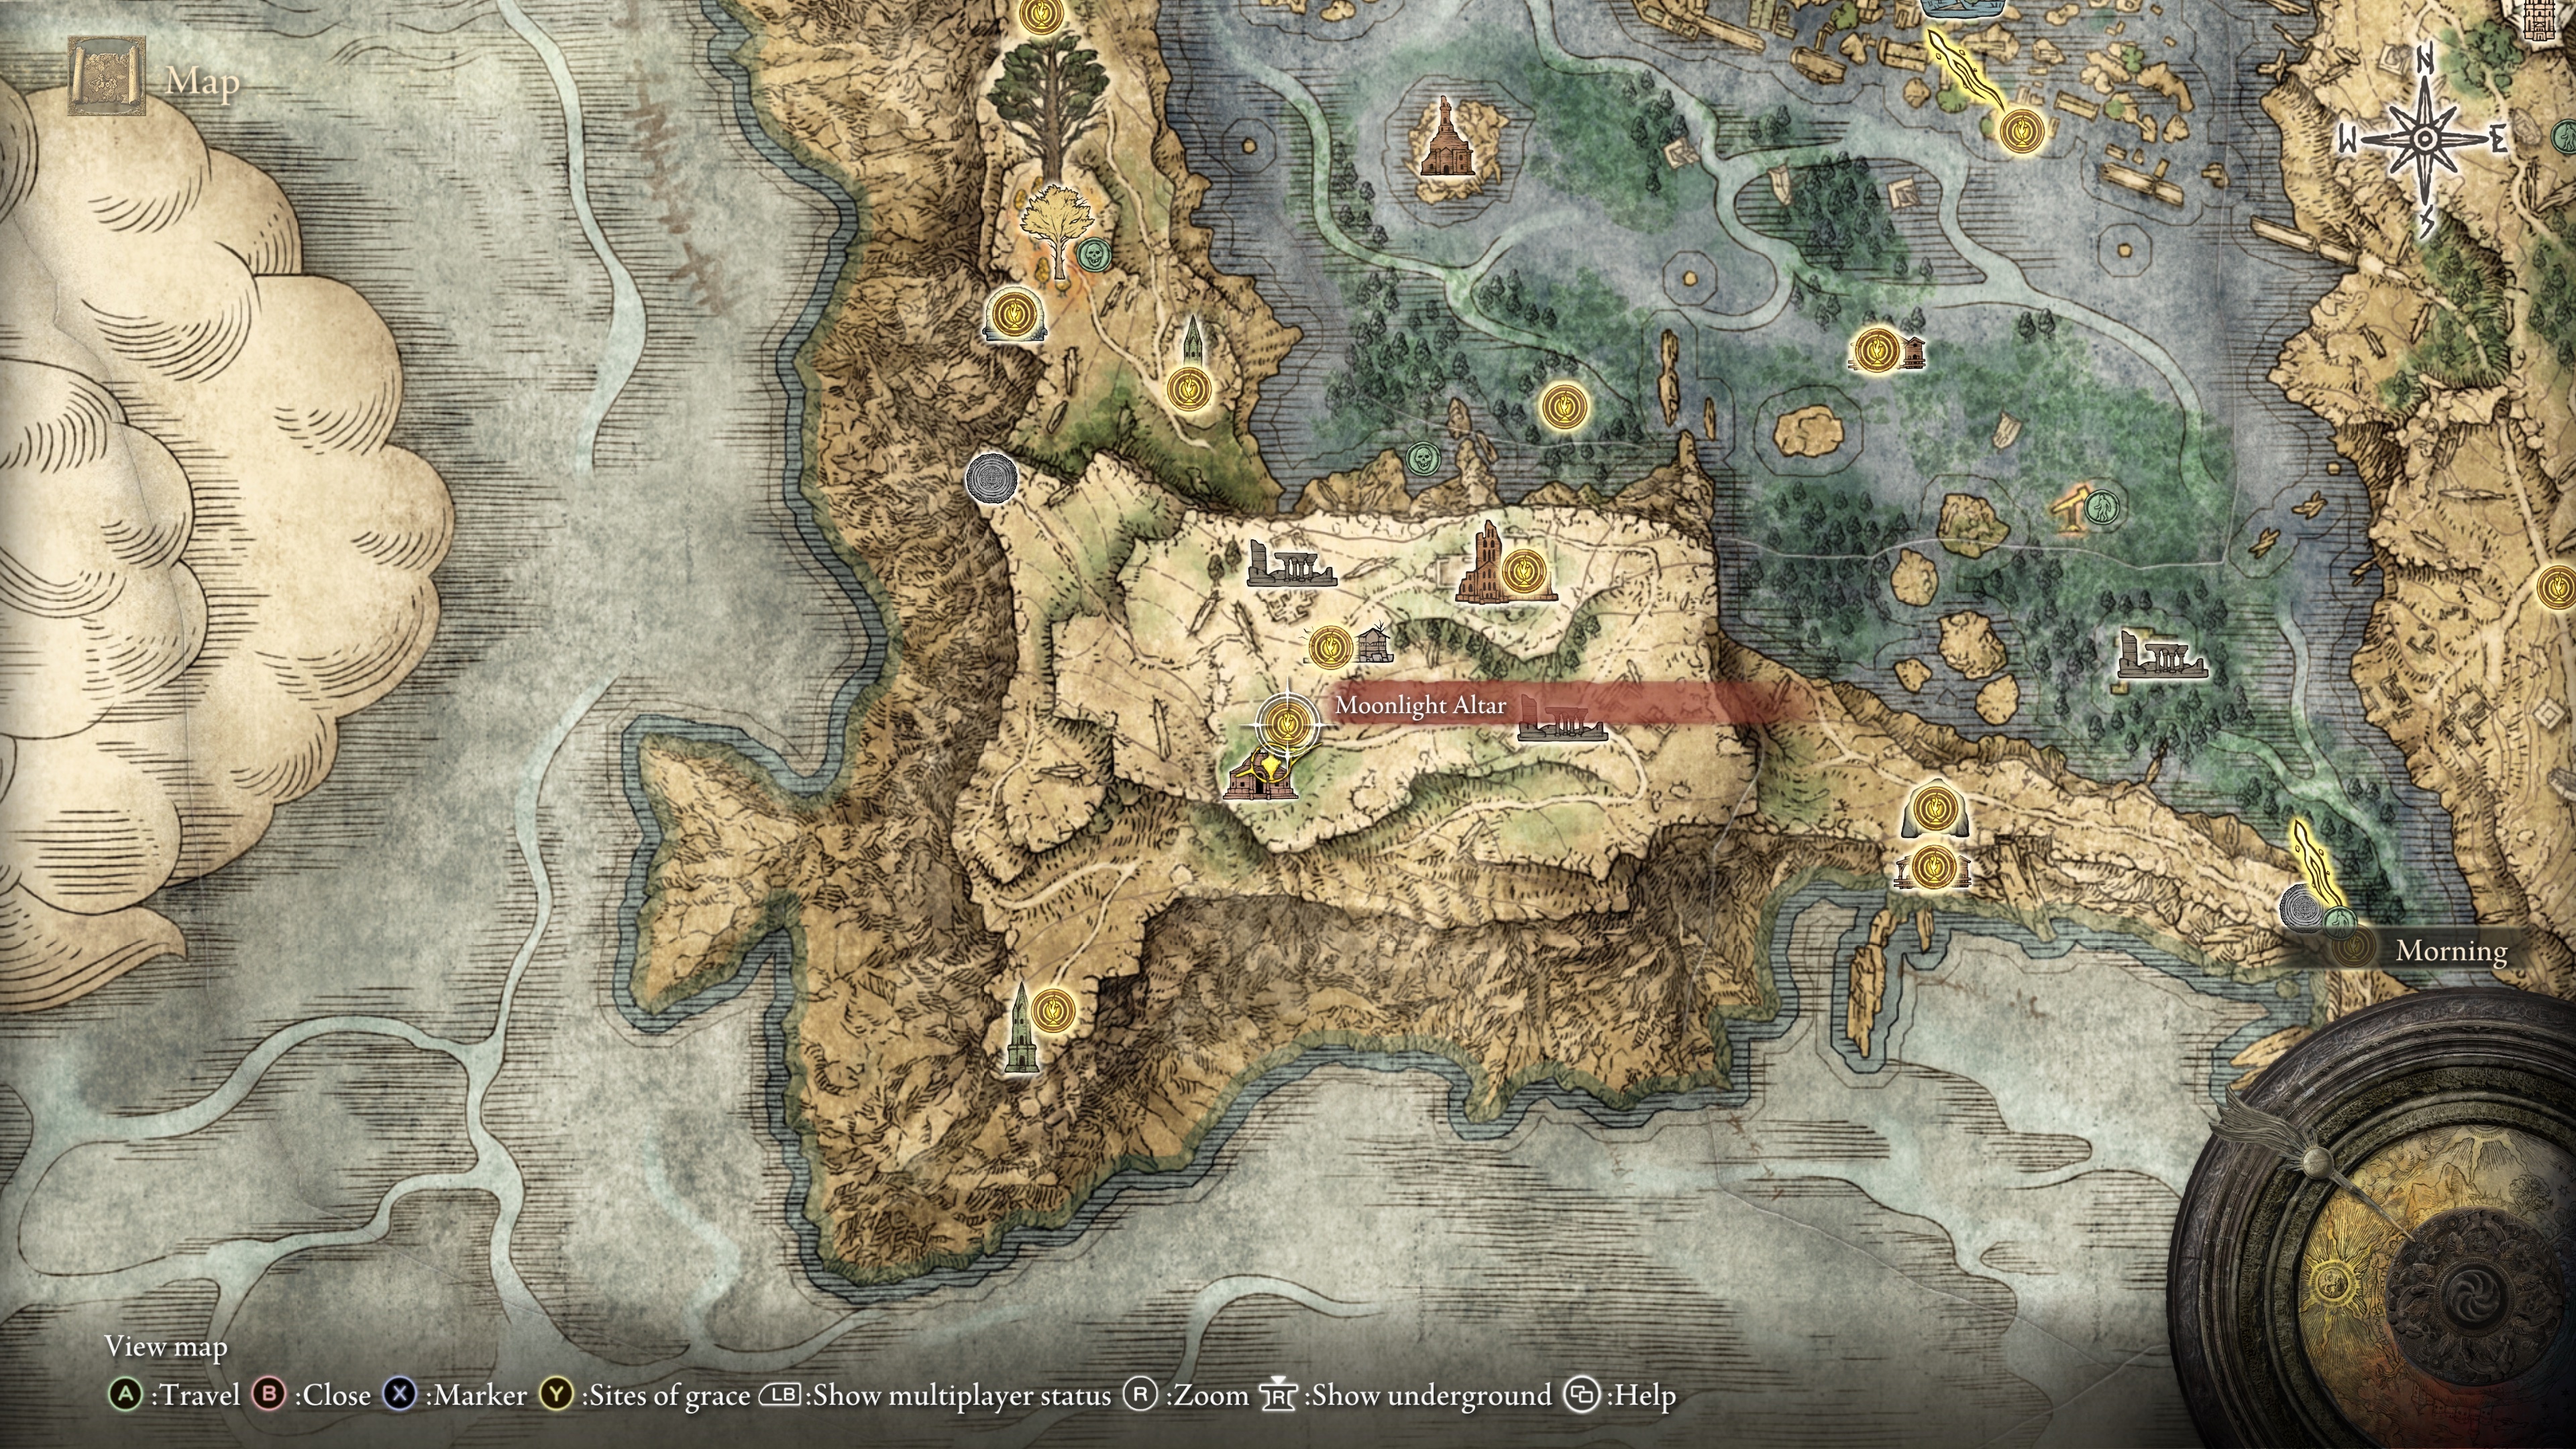 Elden Ring Ranni Questline: All Locations and Steps